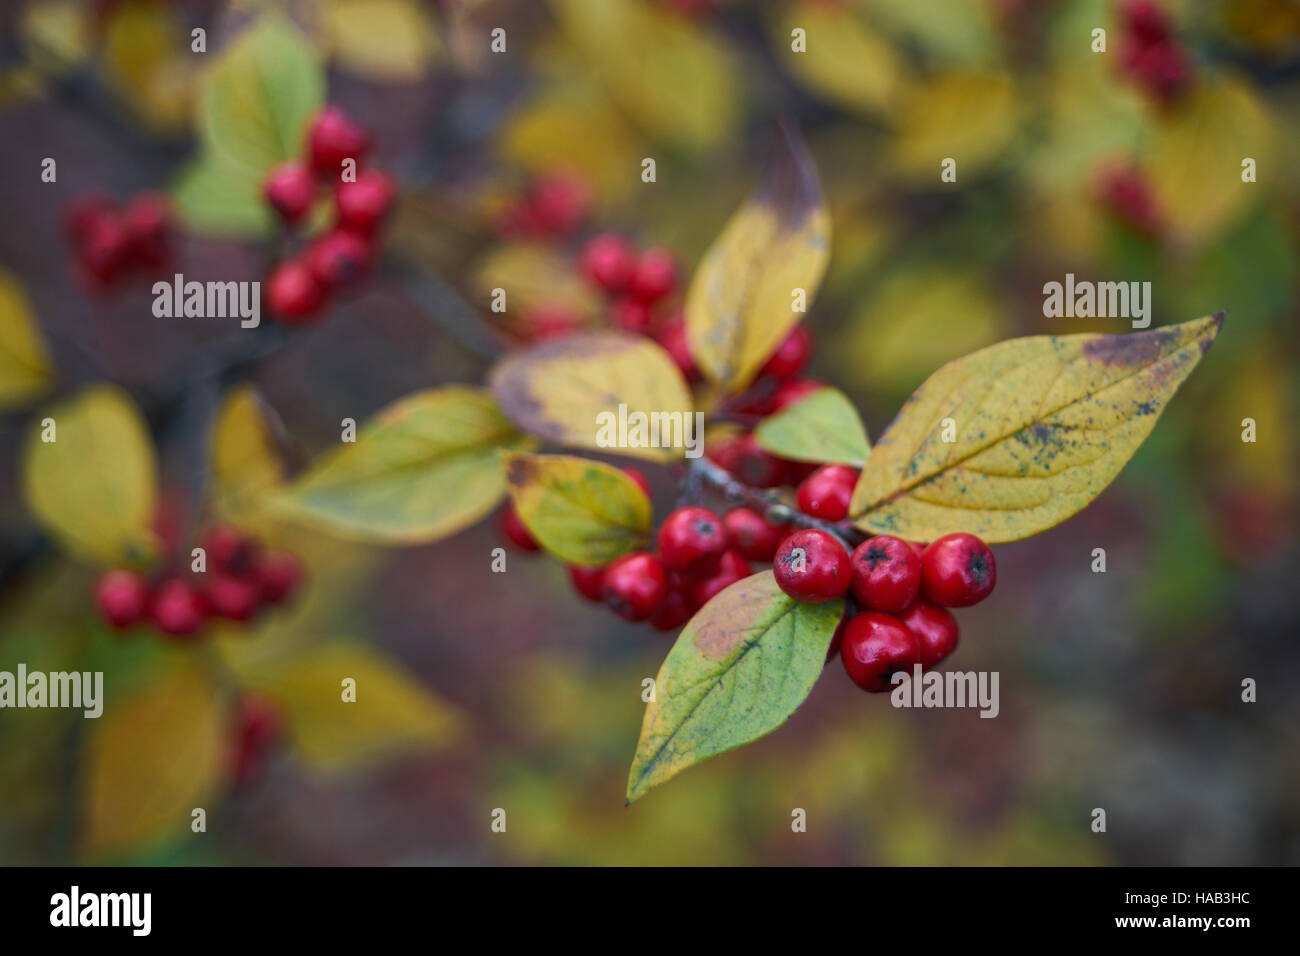 Cotoneaster autumn yellow leaves and red berries Stock Photo